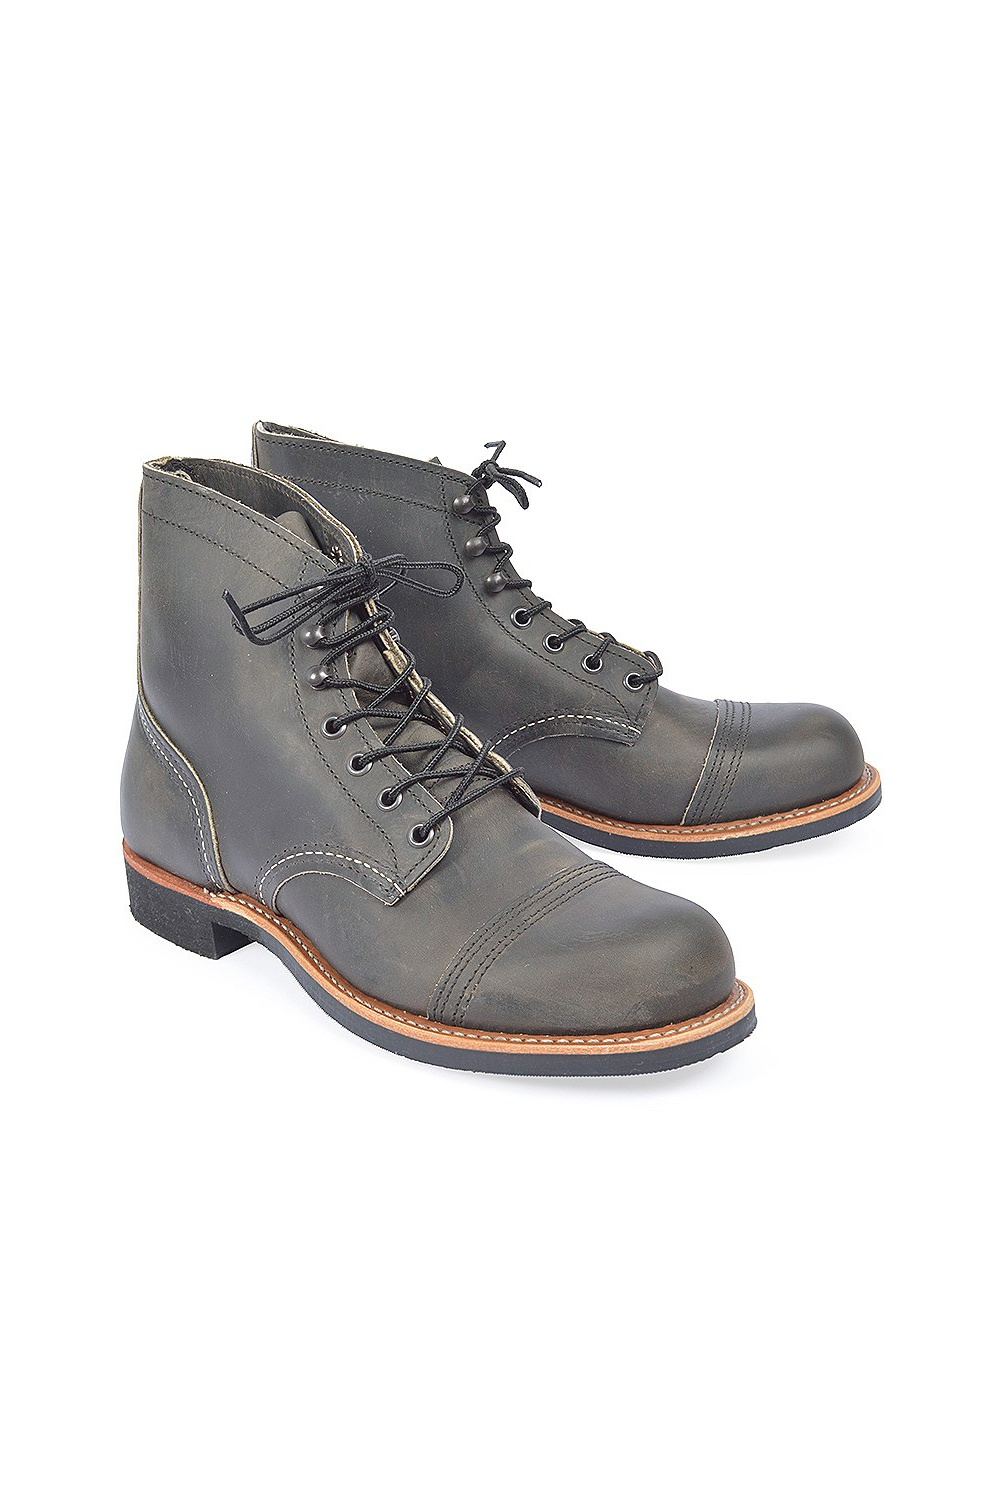 Men's Iron Ranger in Charcoal Rough & Tough from Red Wing Shoes ...